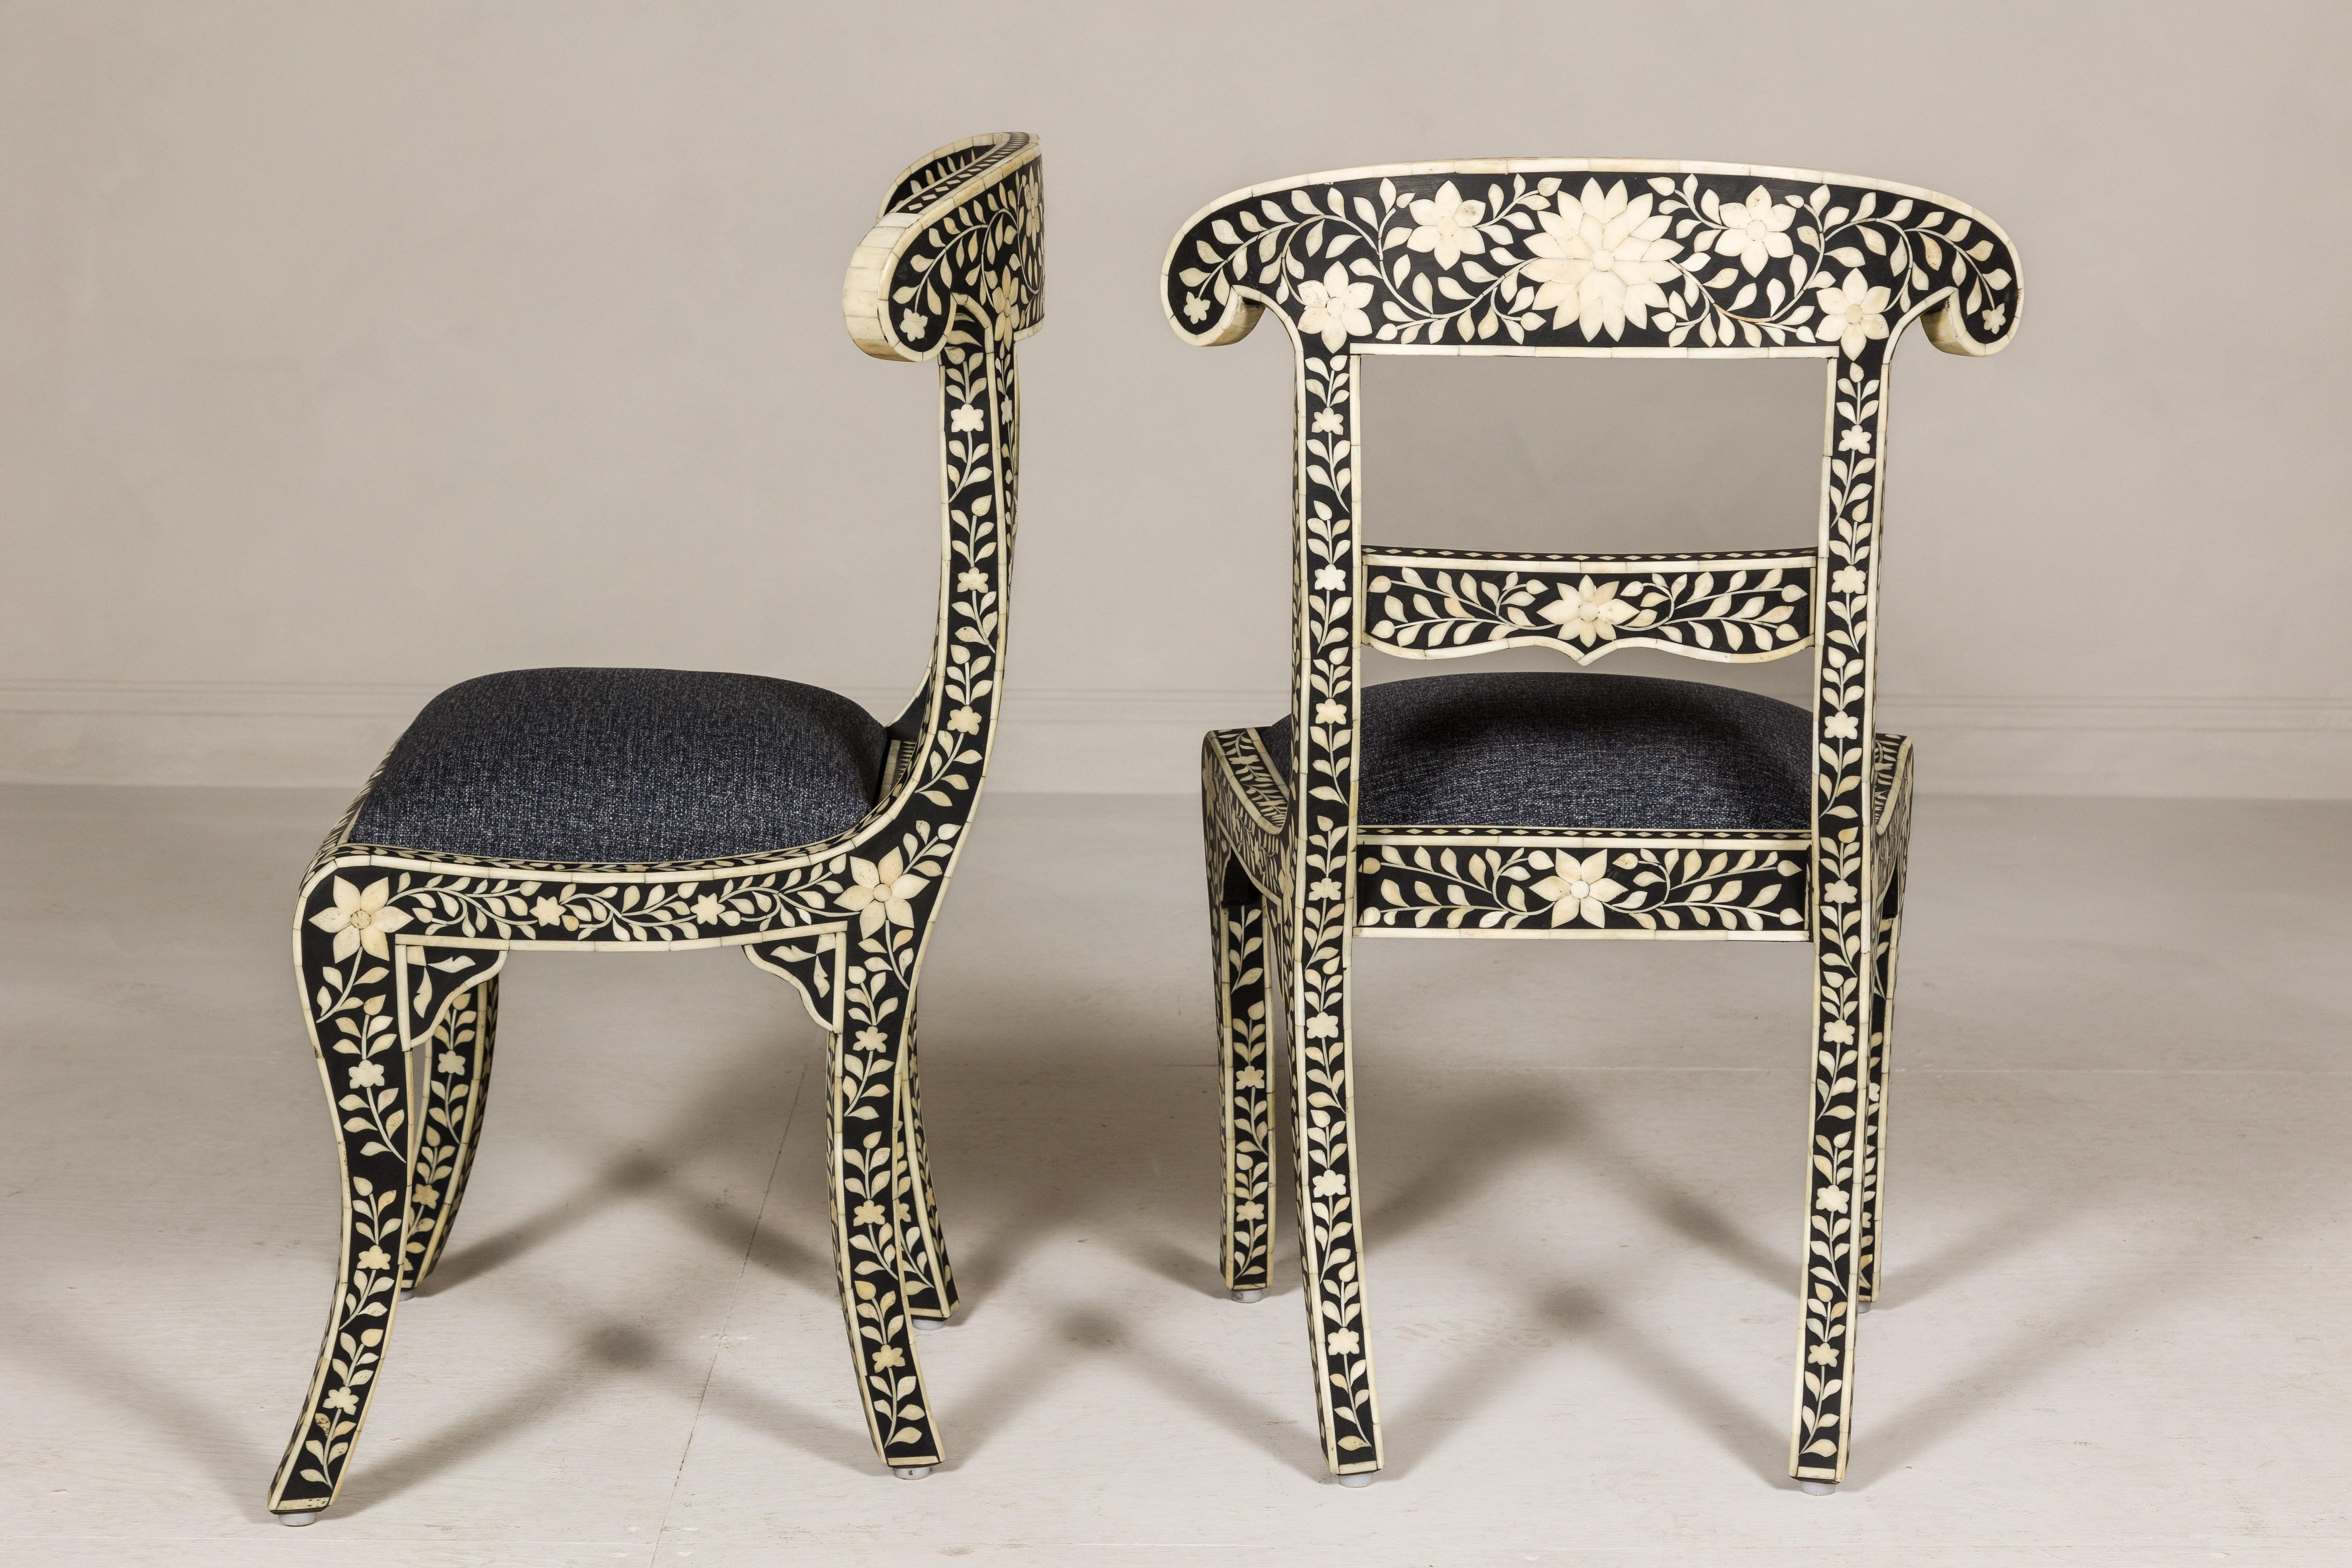 Anglo-Indian Style Ebonized Side Chairs with Floral Themed Bone Inlay, a Pair For Sale 8